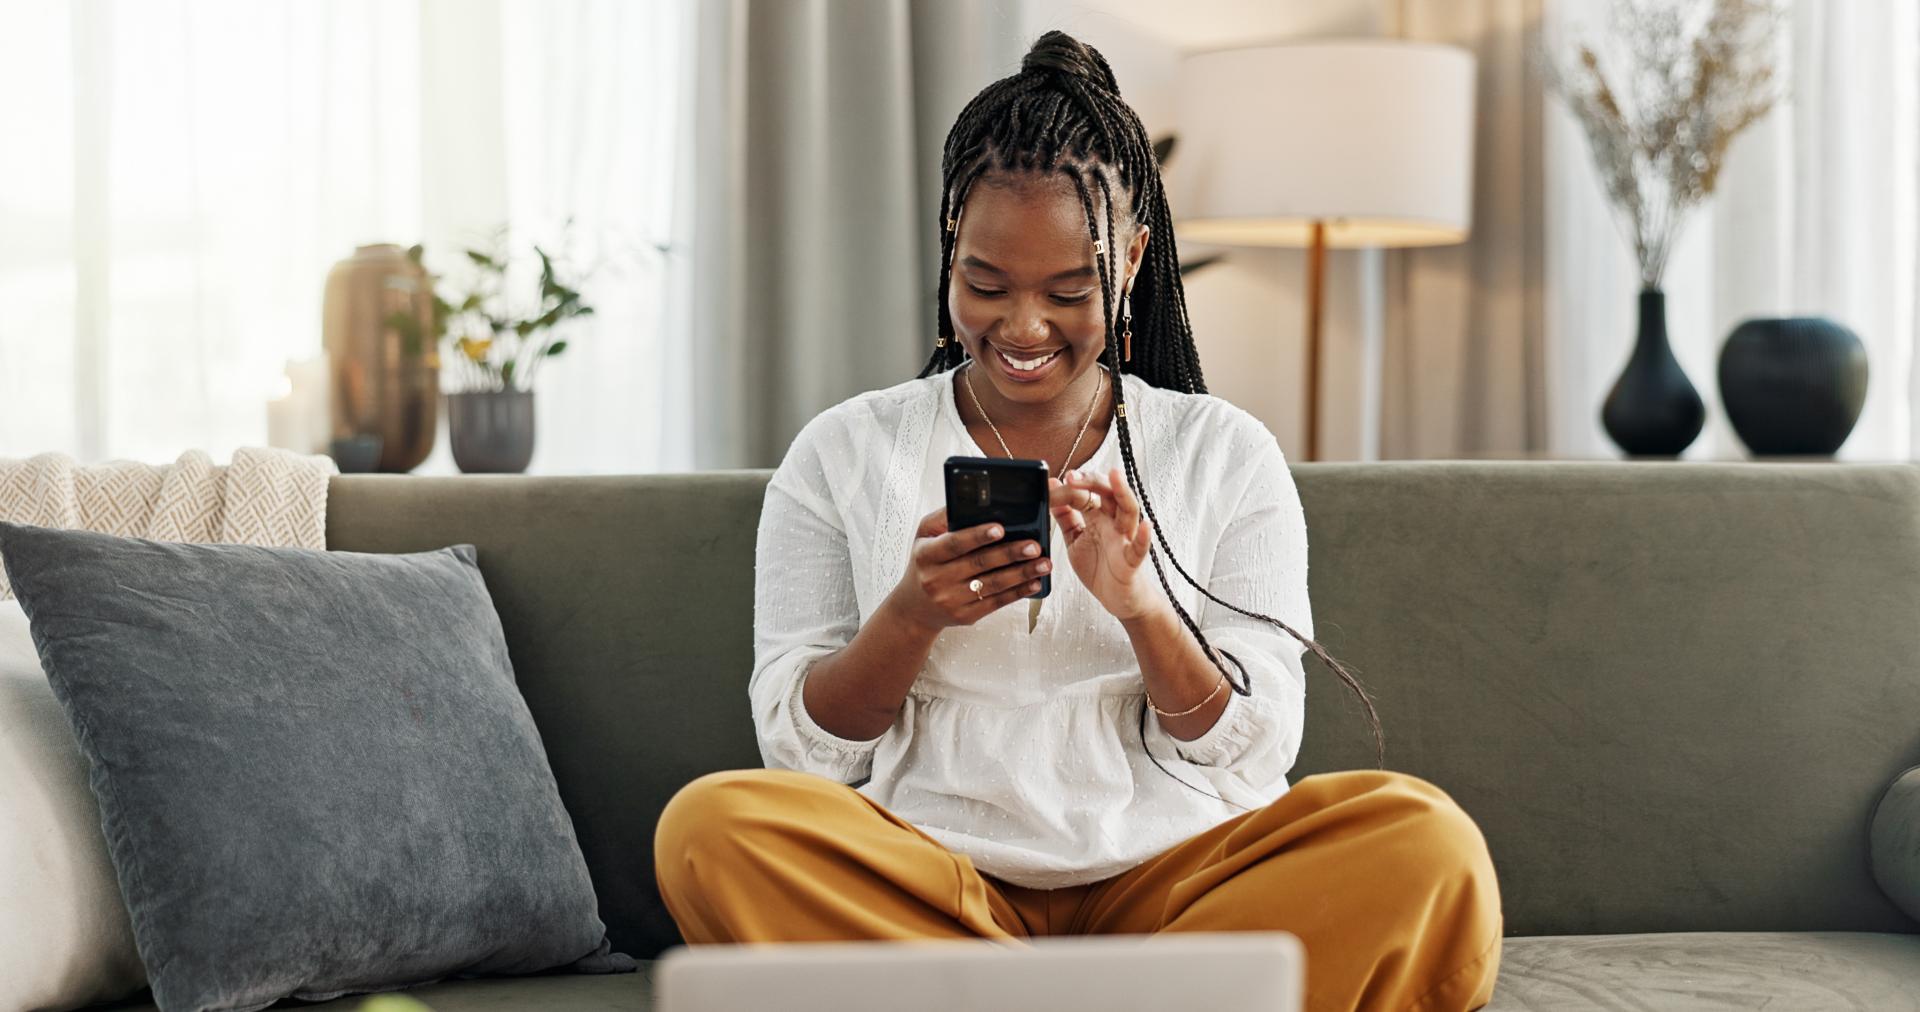 Black woman wearing a white top sitting on a couch smiling at her smartphone